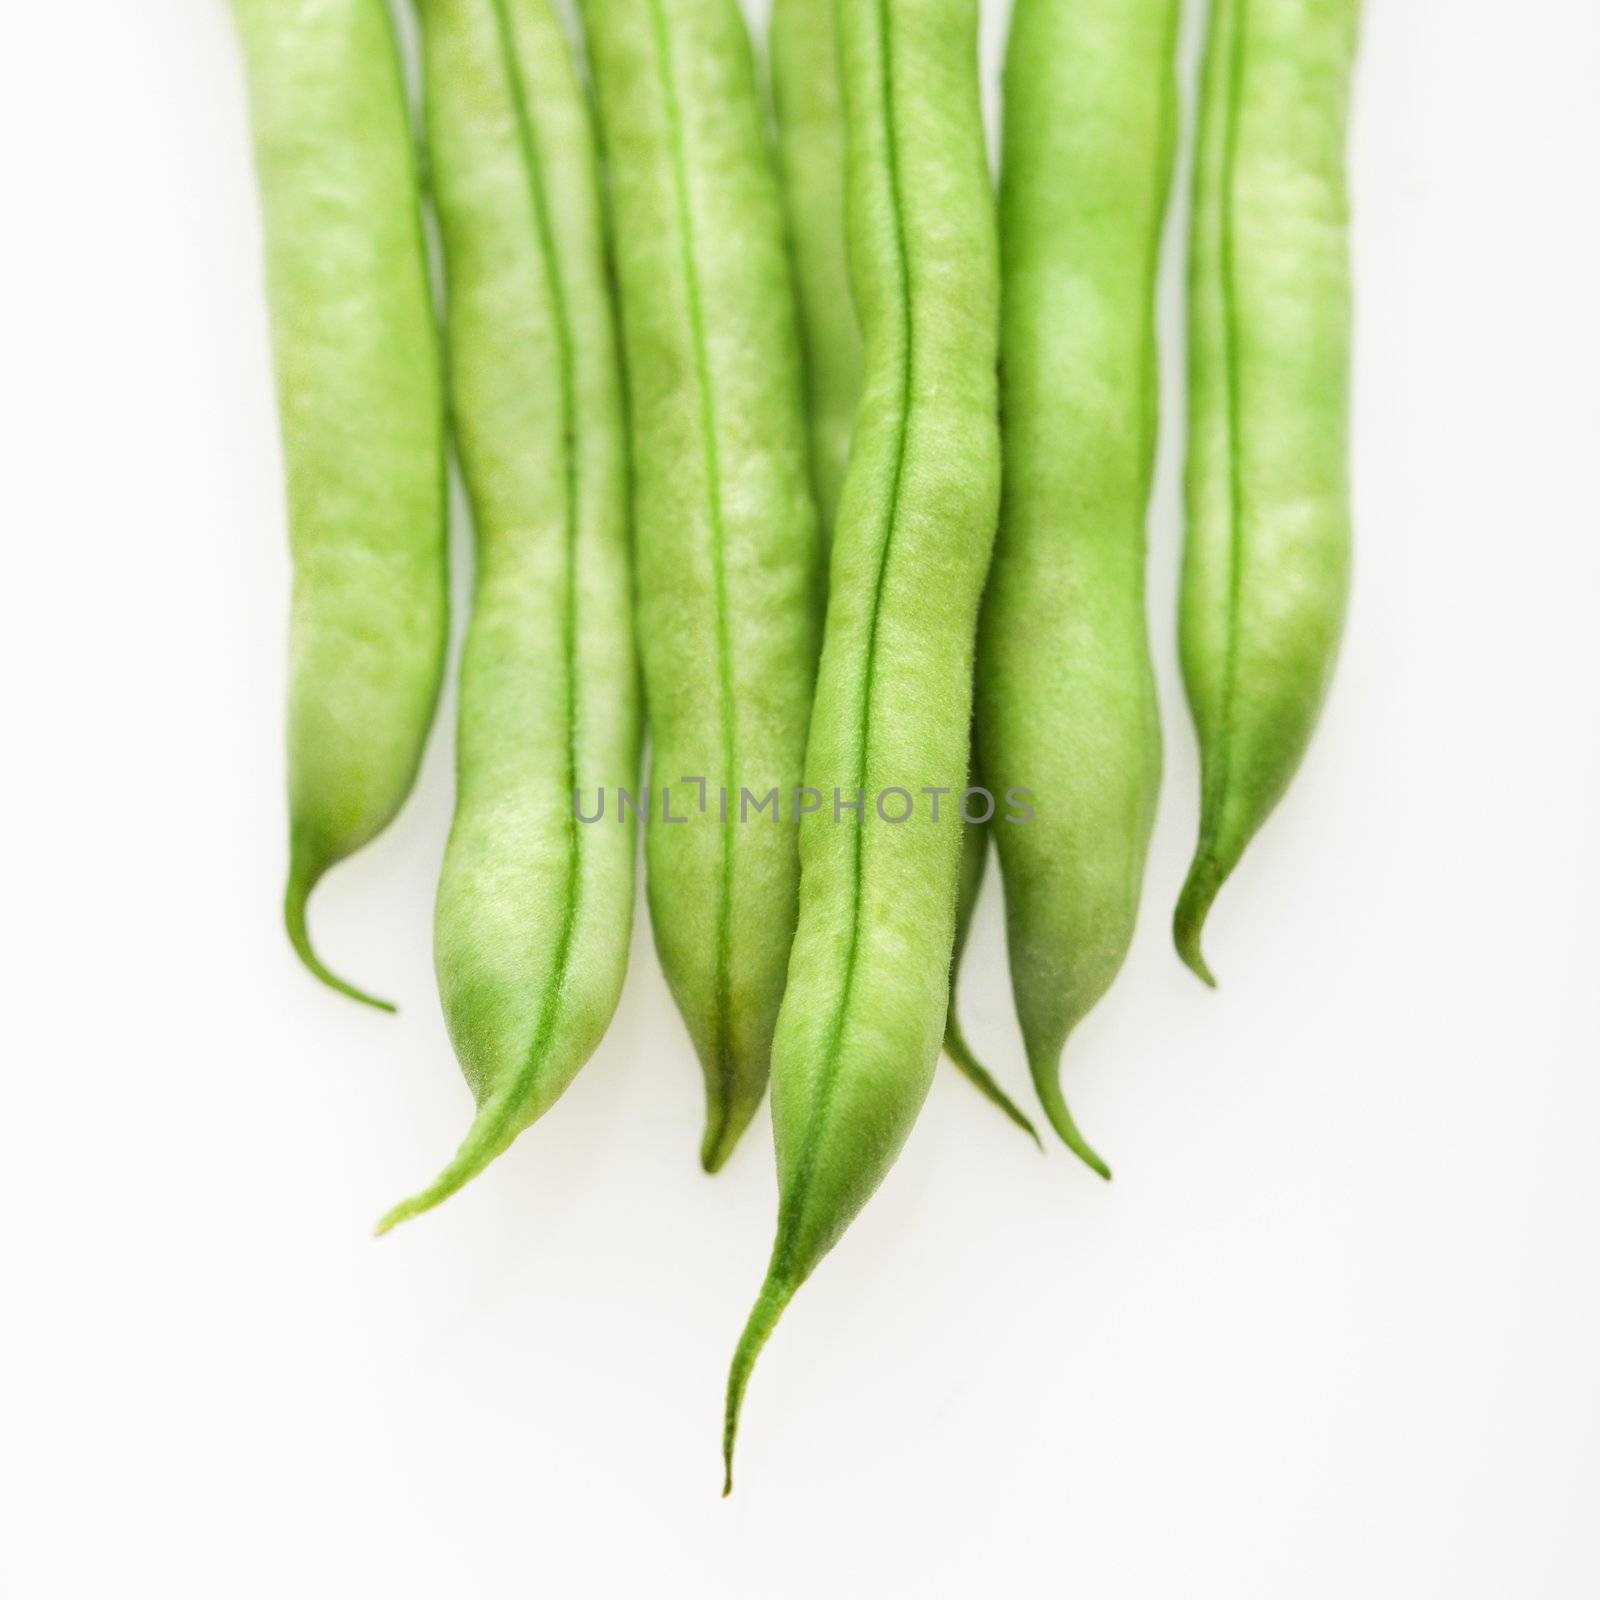 Close up of green beans on white background.